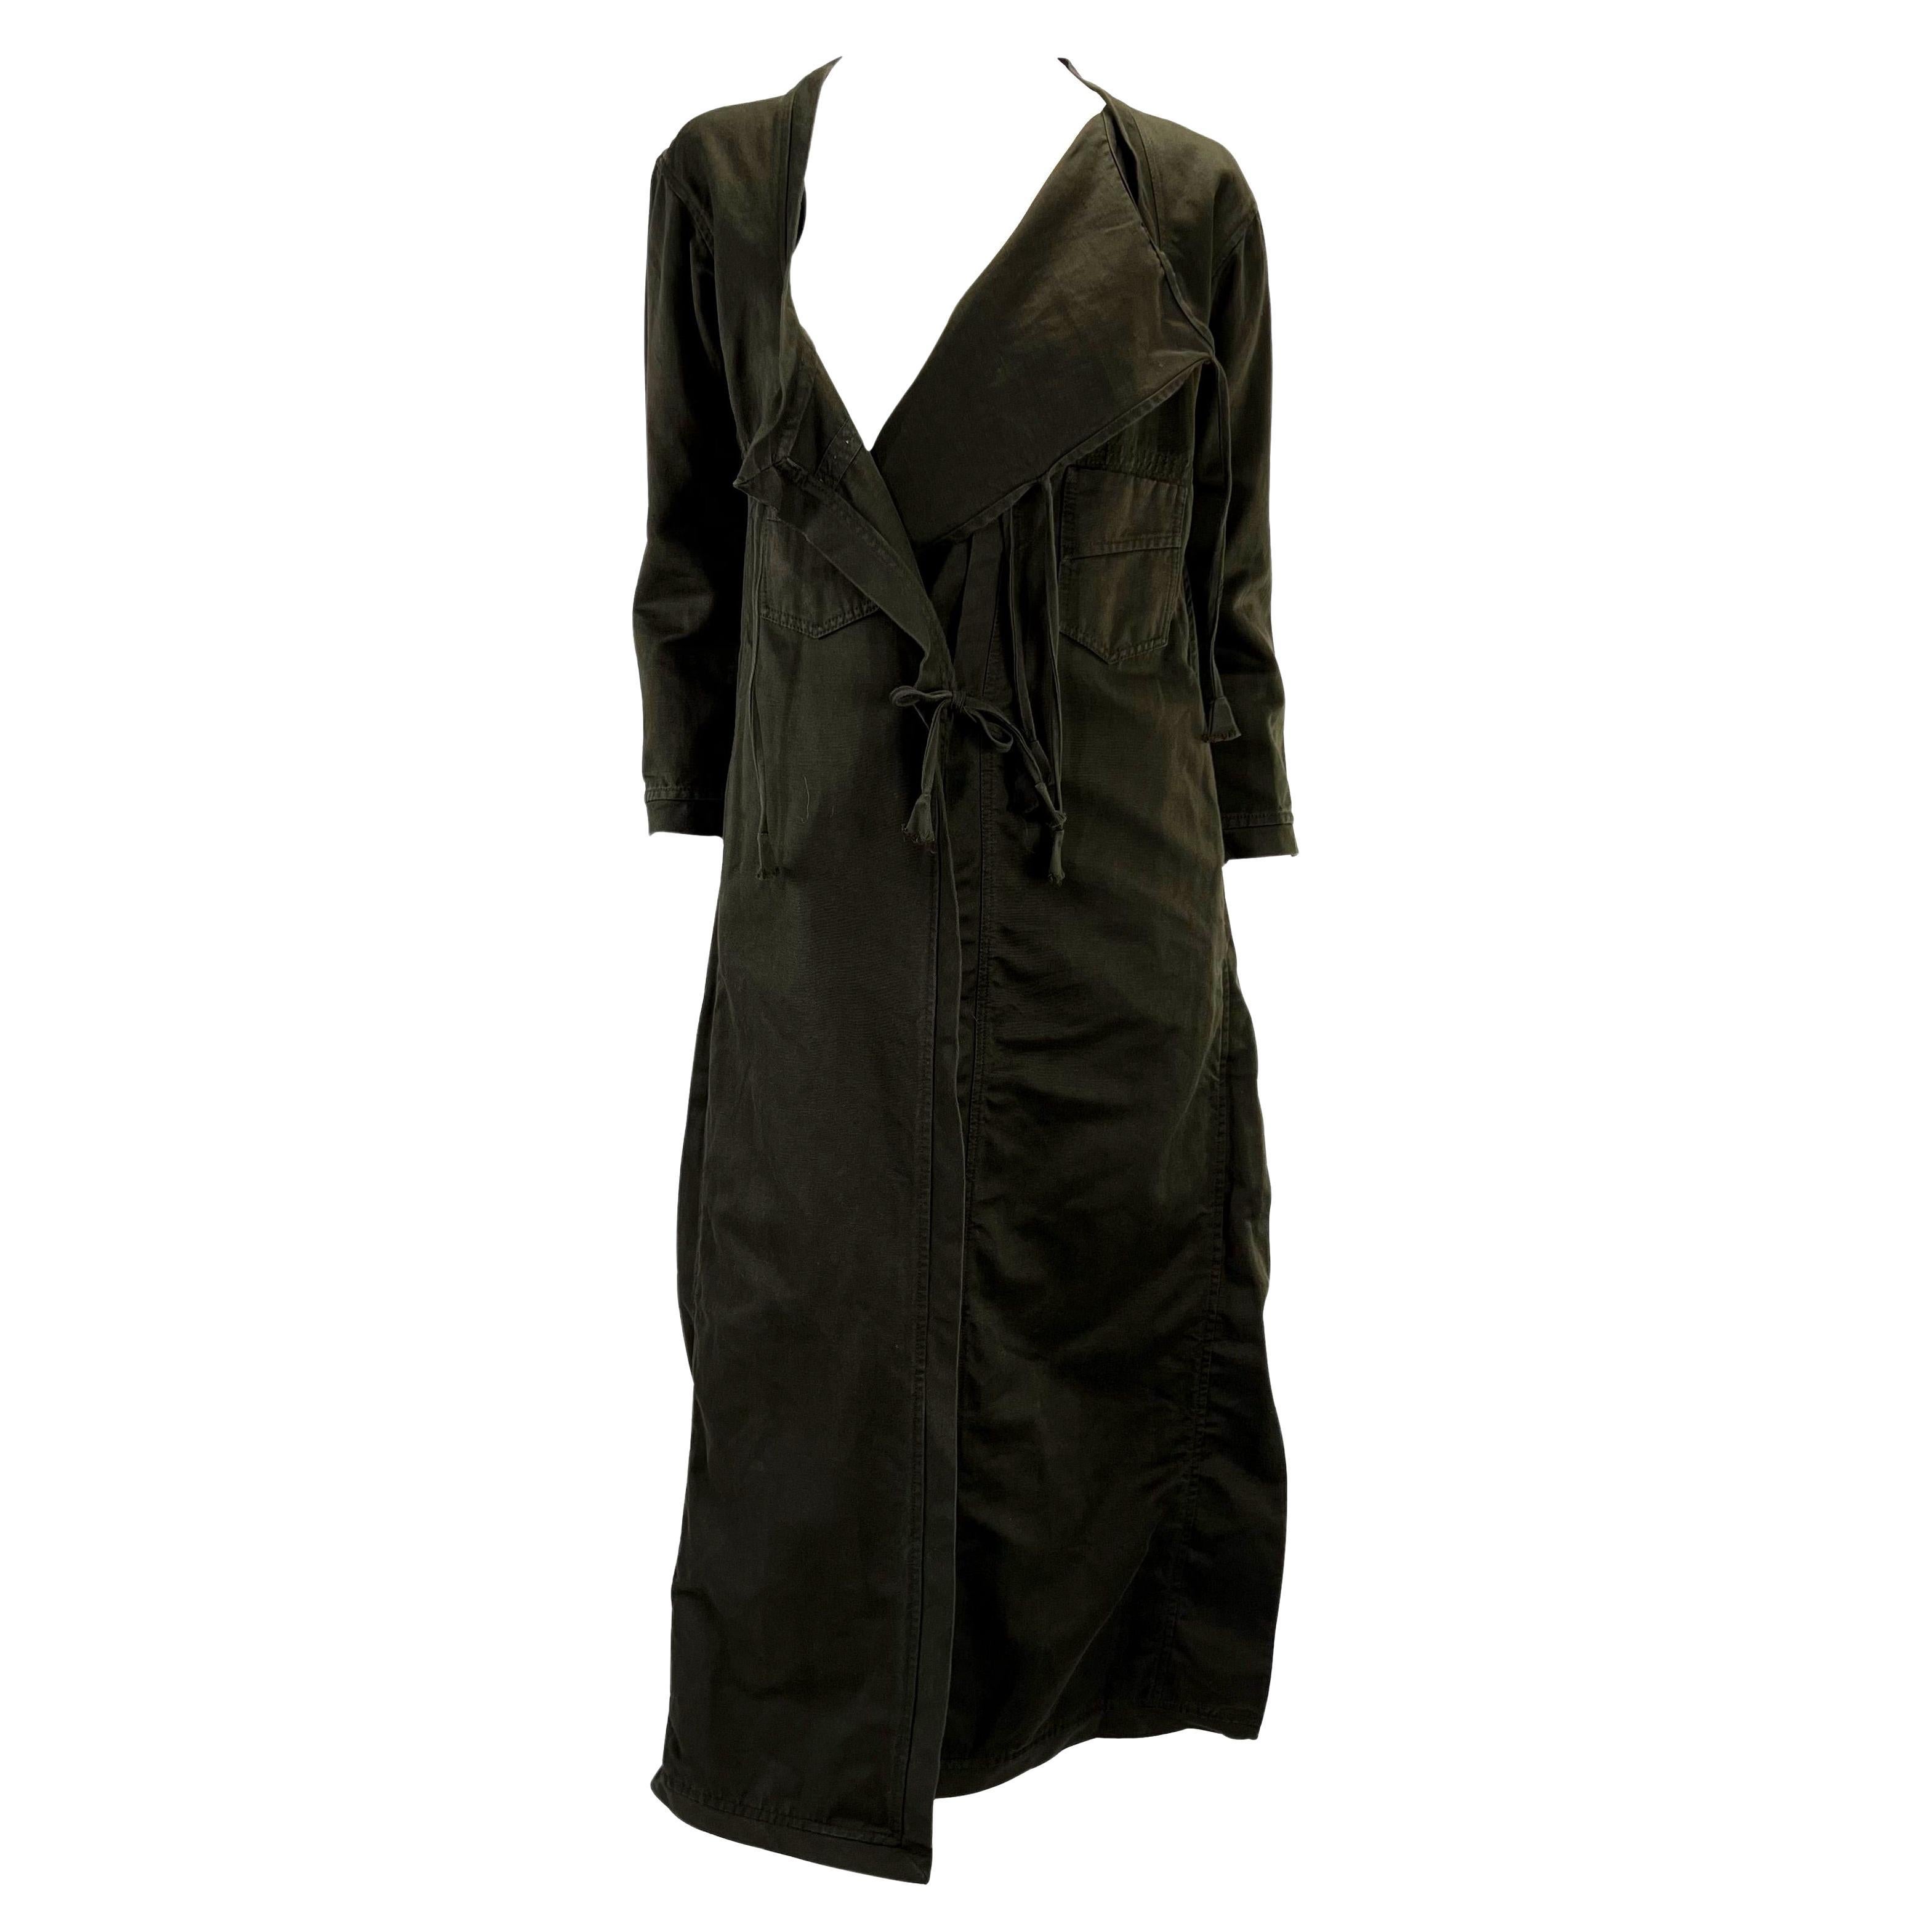 S/S 2002 Gucci by Tom Ford Brown Brown Cotton Oversized Cotton Duster Coat Dress en vente